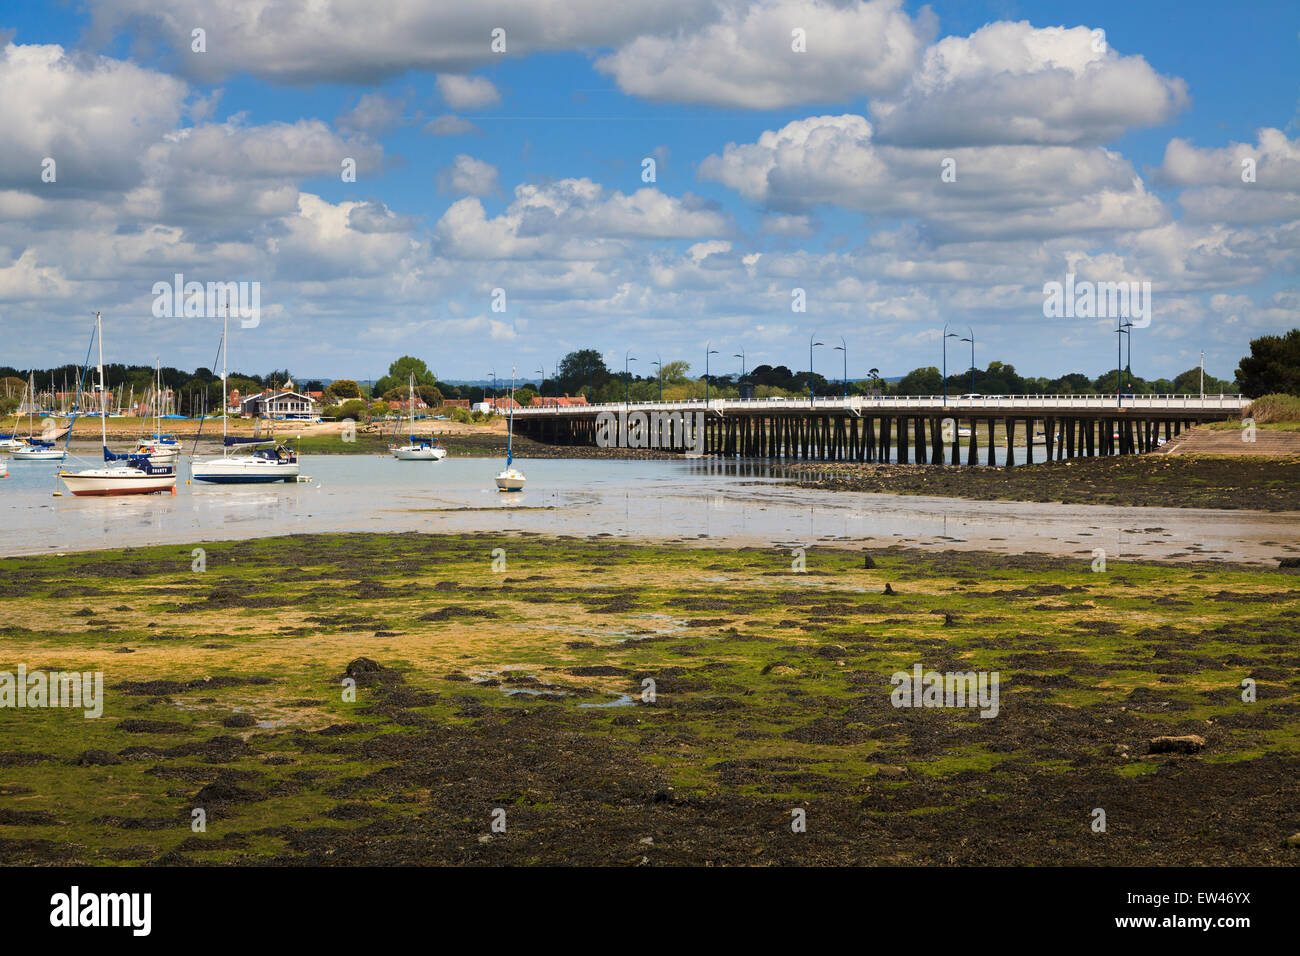 Distant view of the langstone bridge at low tide with moored yachts Stock Photo